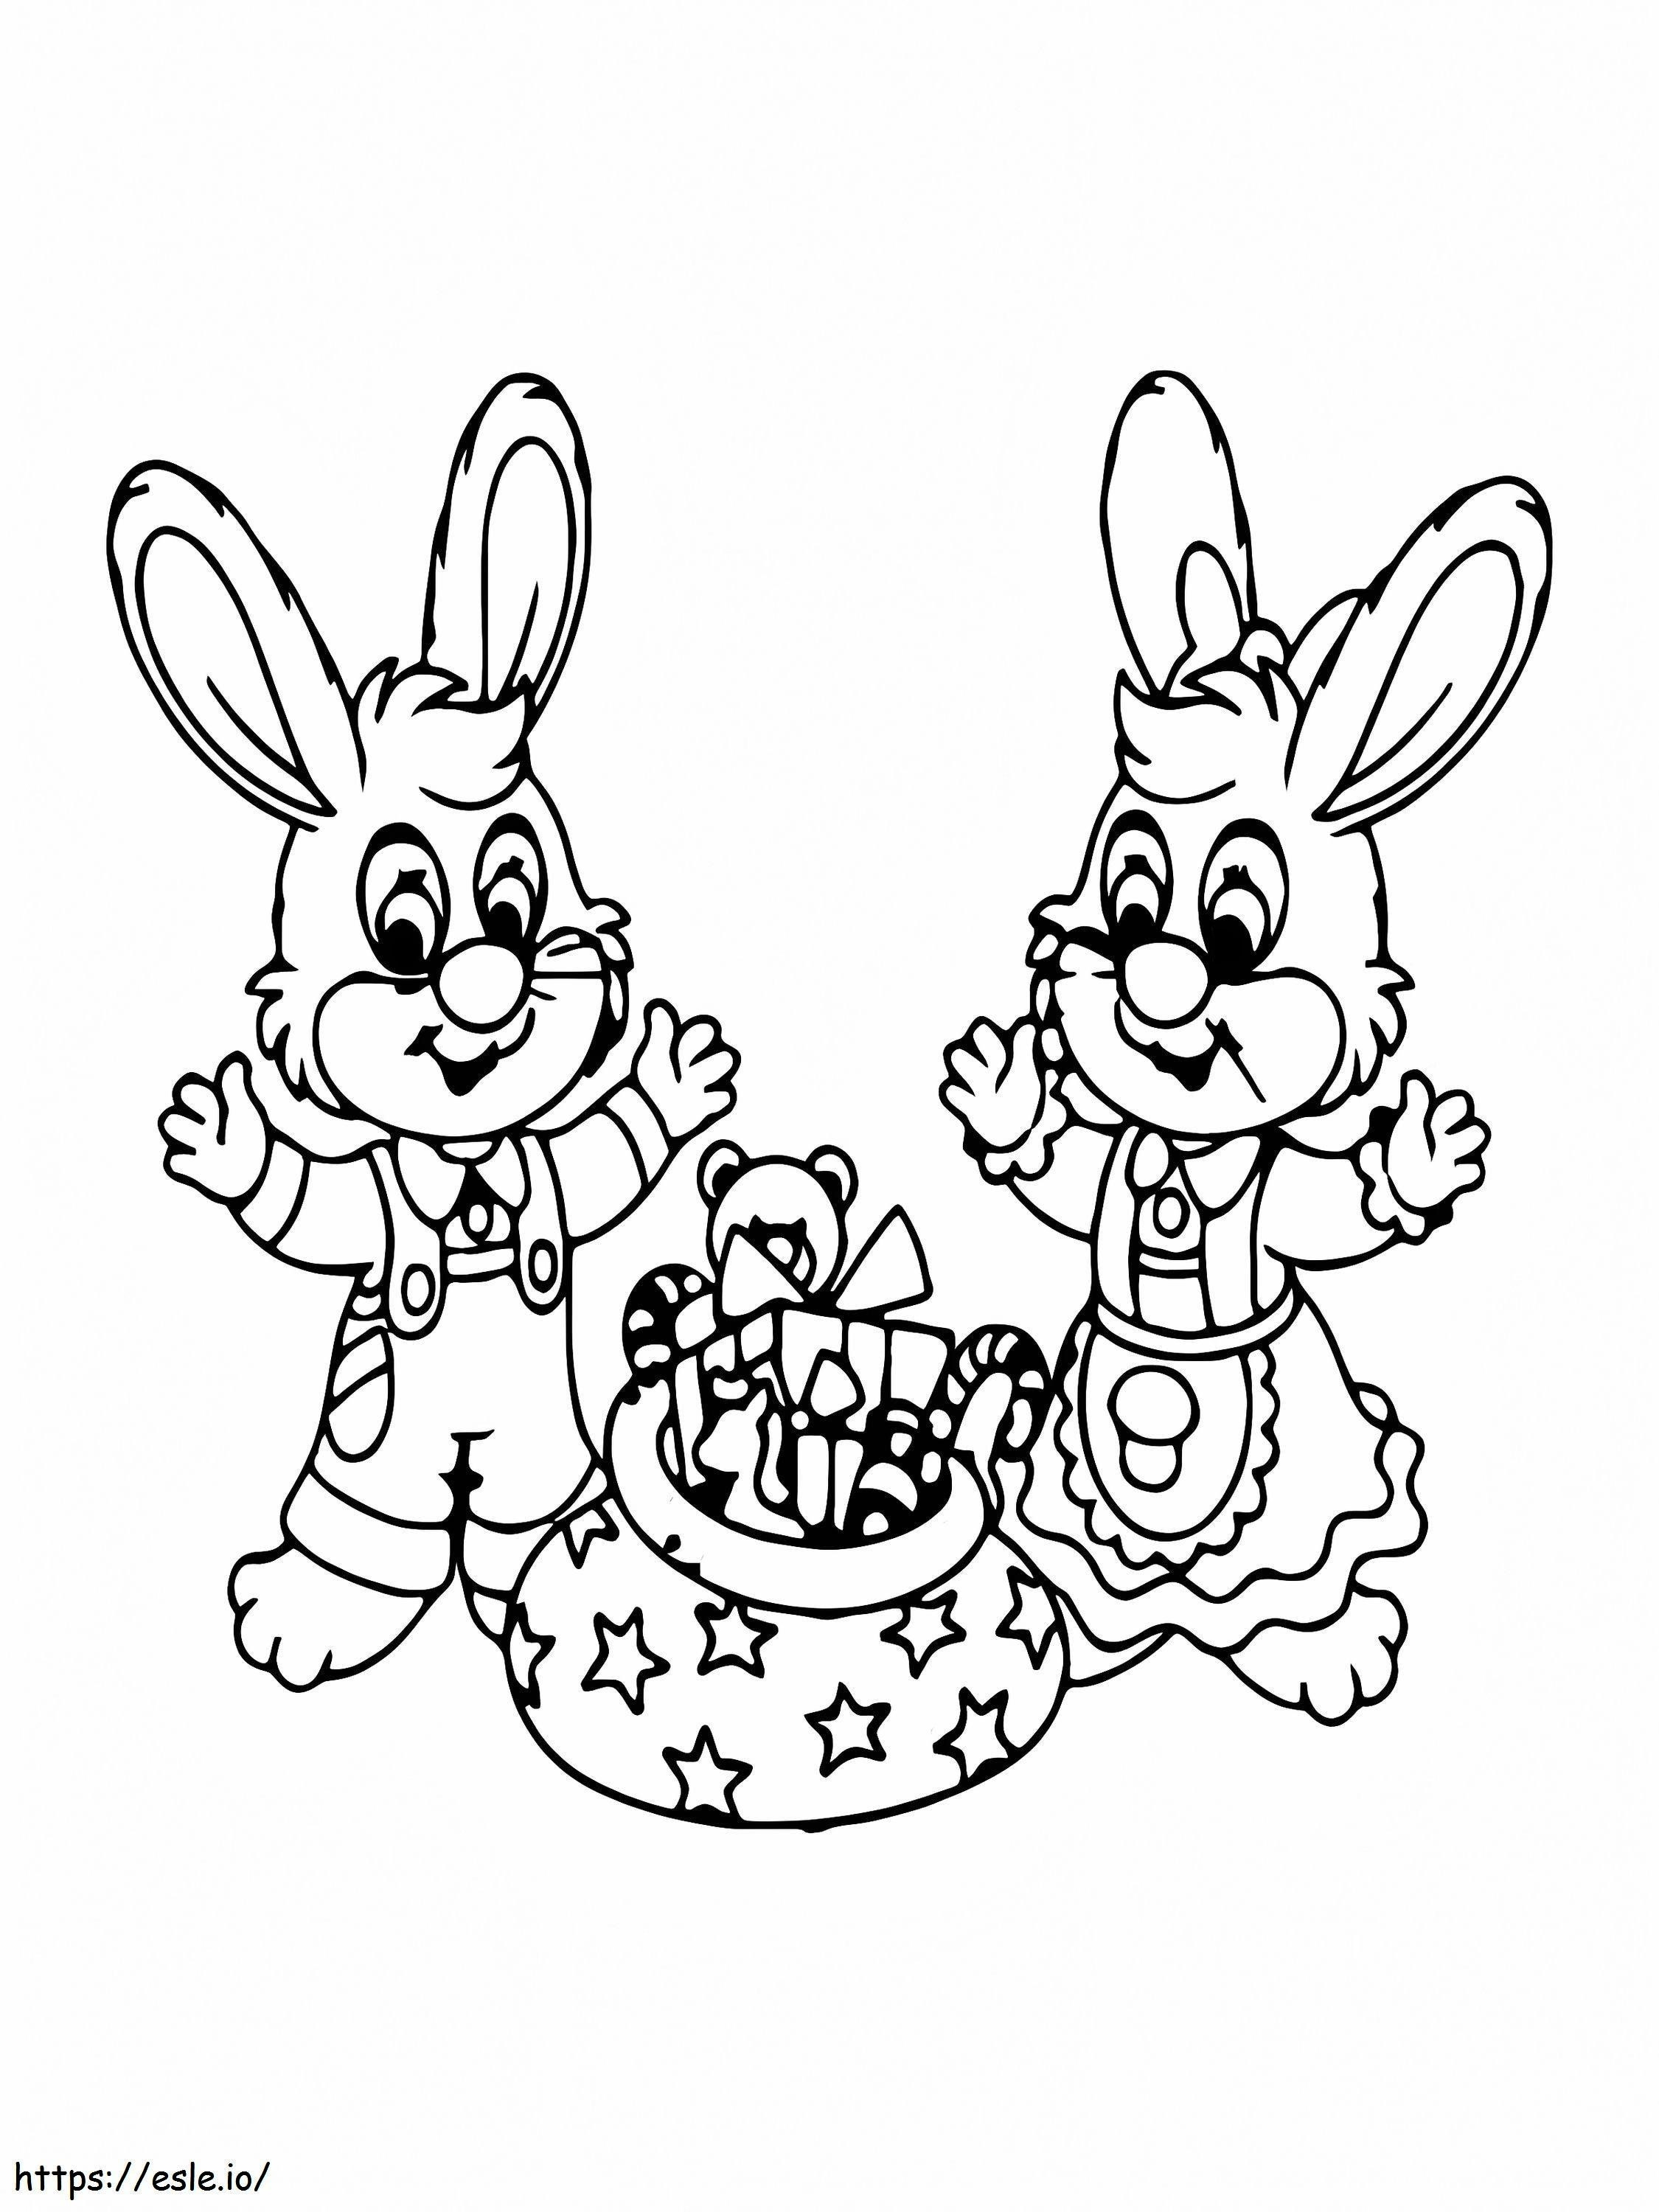 Two Christmas Rabbits coloring page